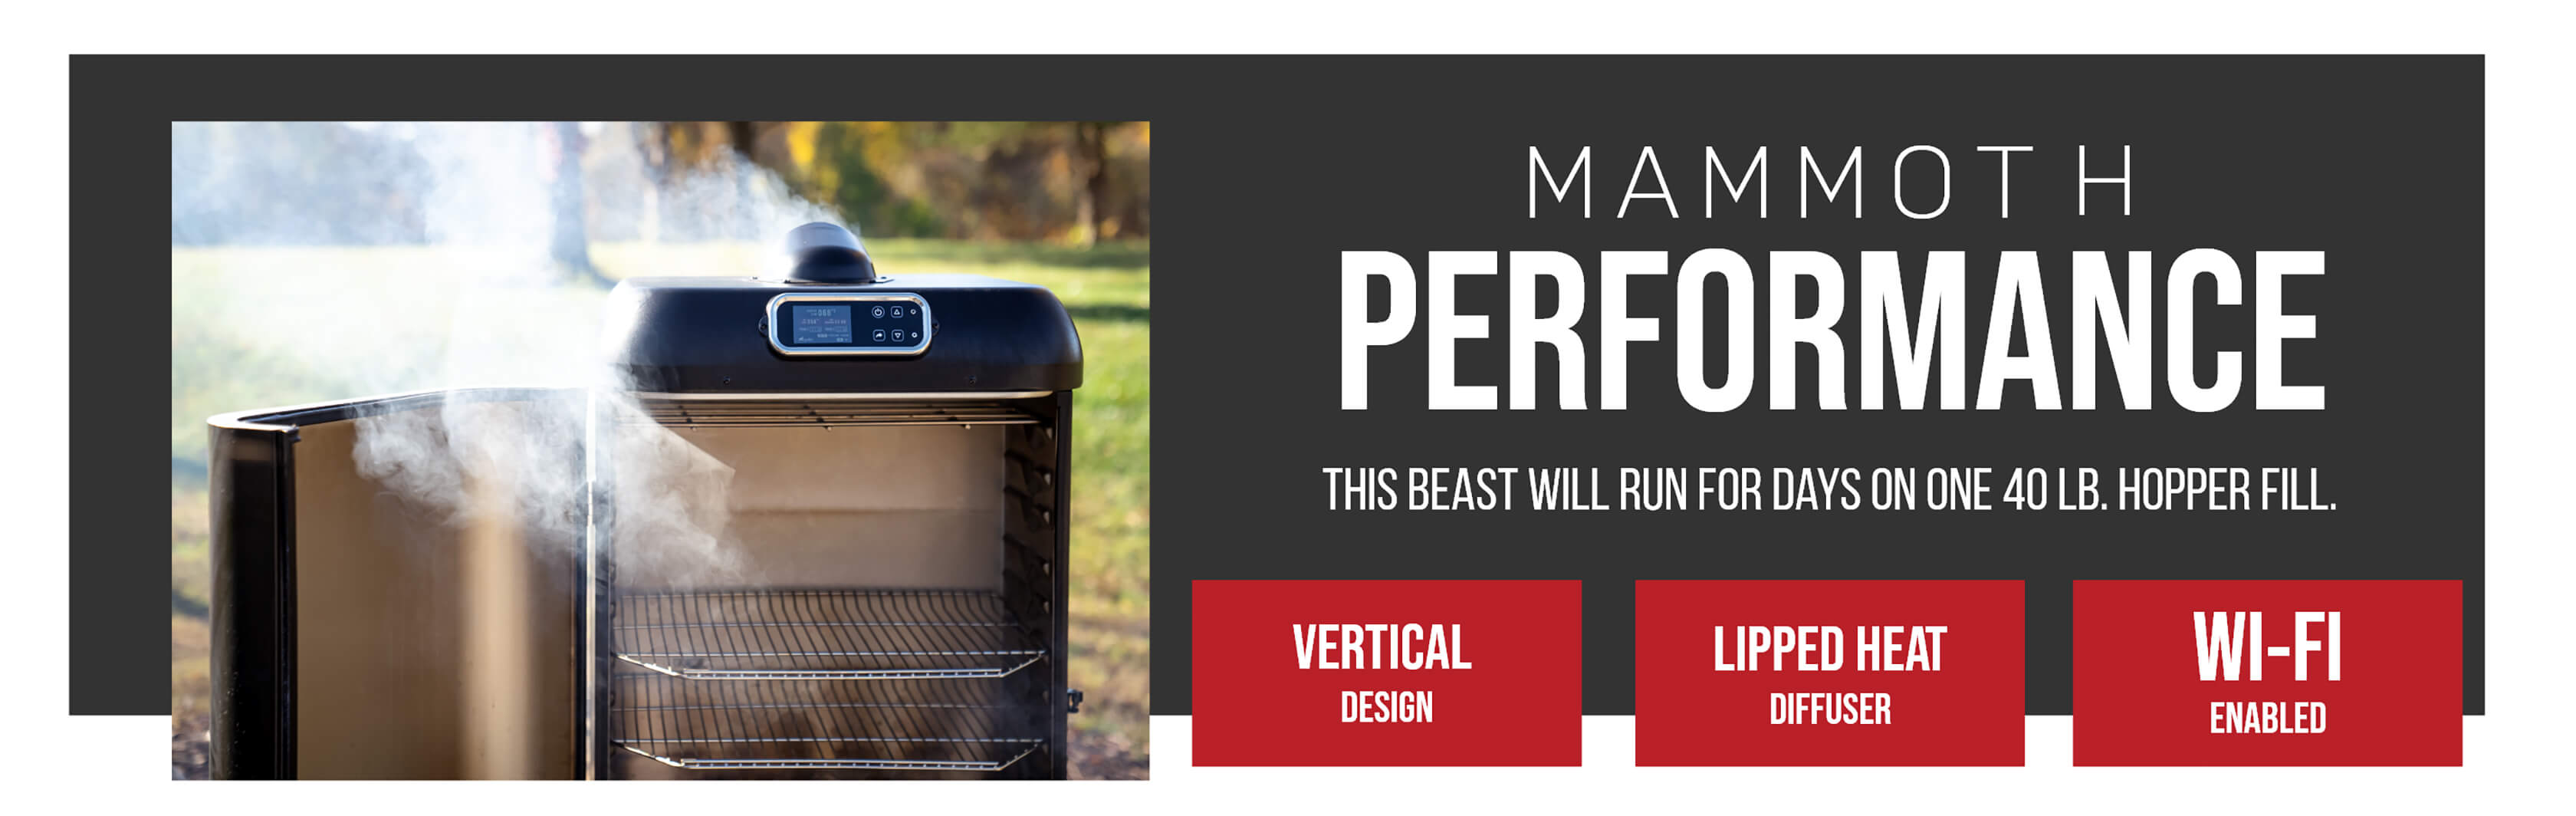 Mammoth Performance- this beast will run for days on one 40lb hopper fill ( vertical design, lipped heat diffuser, wi-fi enabled) 